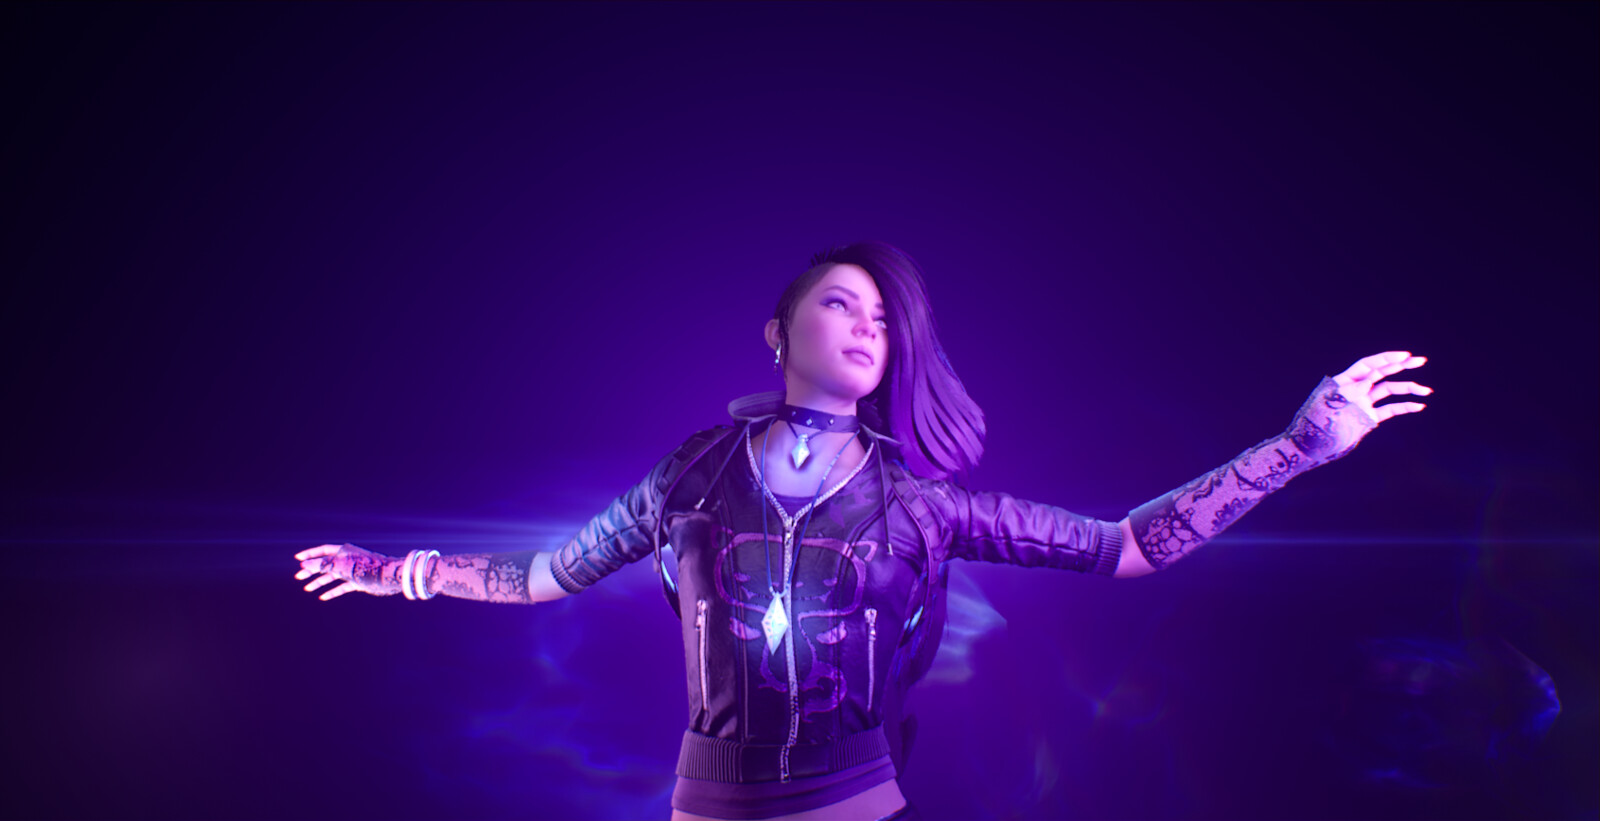 Example of a character from Paragon using the custom light solution, 